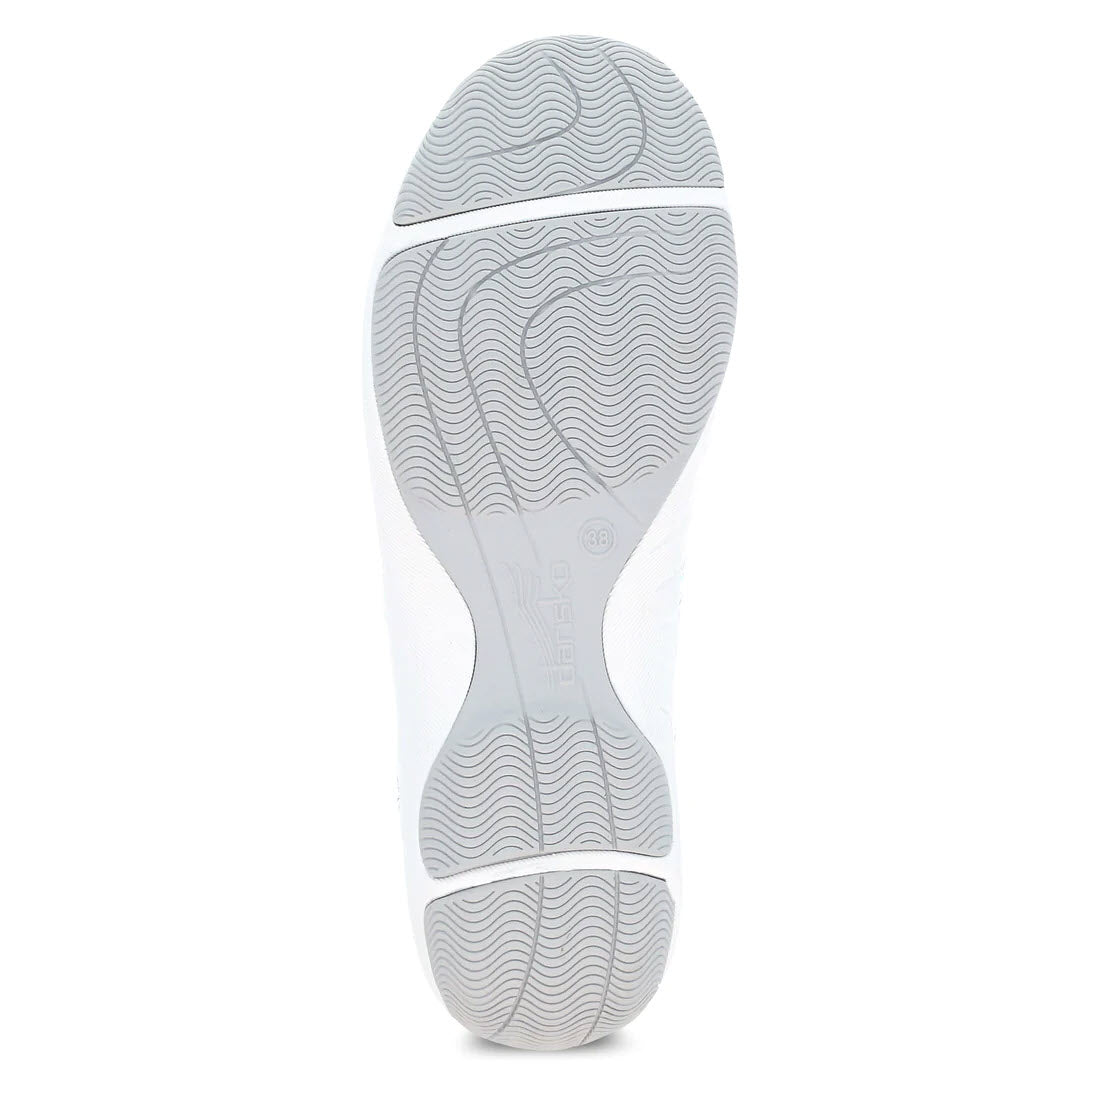 Sole of a sneaker displaying a wavy, white rubber tread pattern with Dansko insignias.